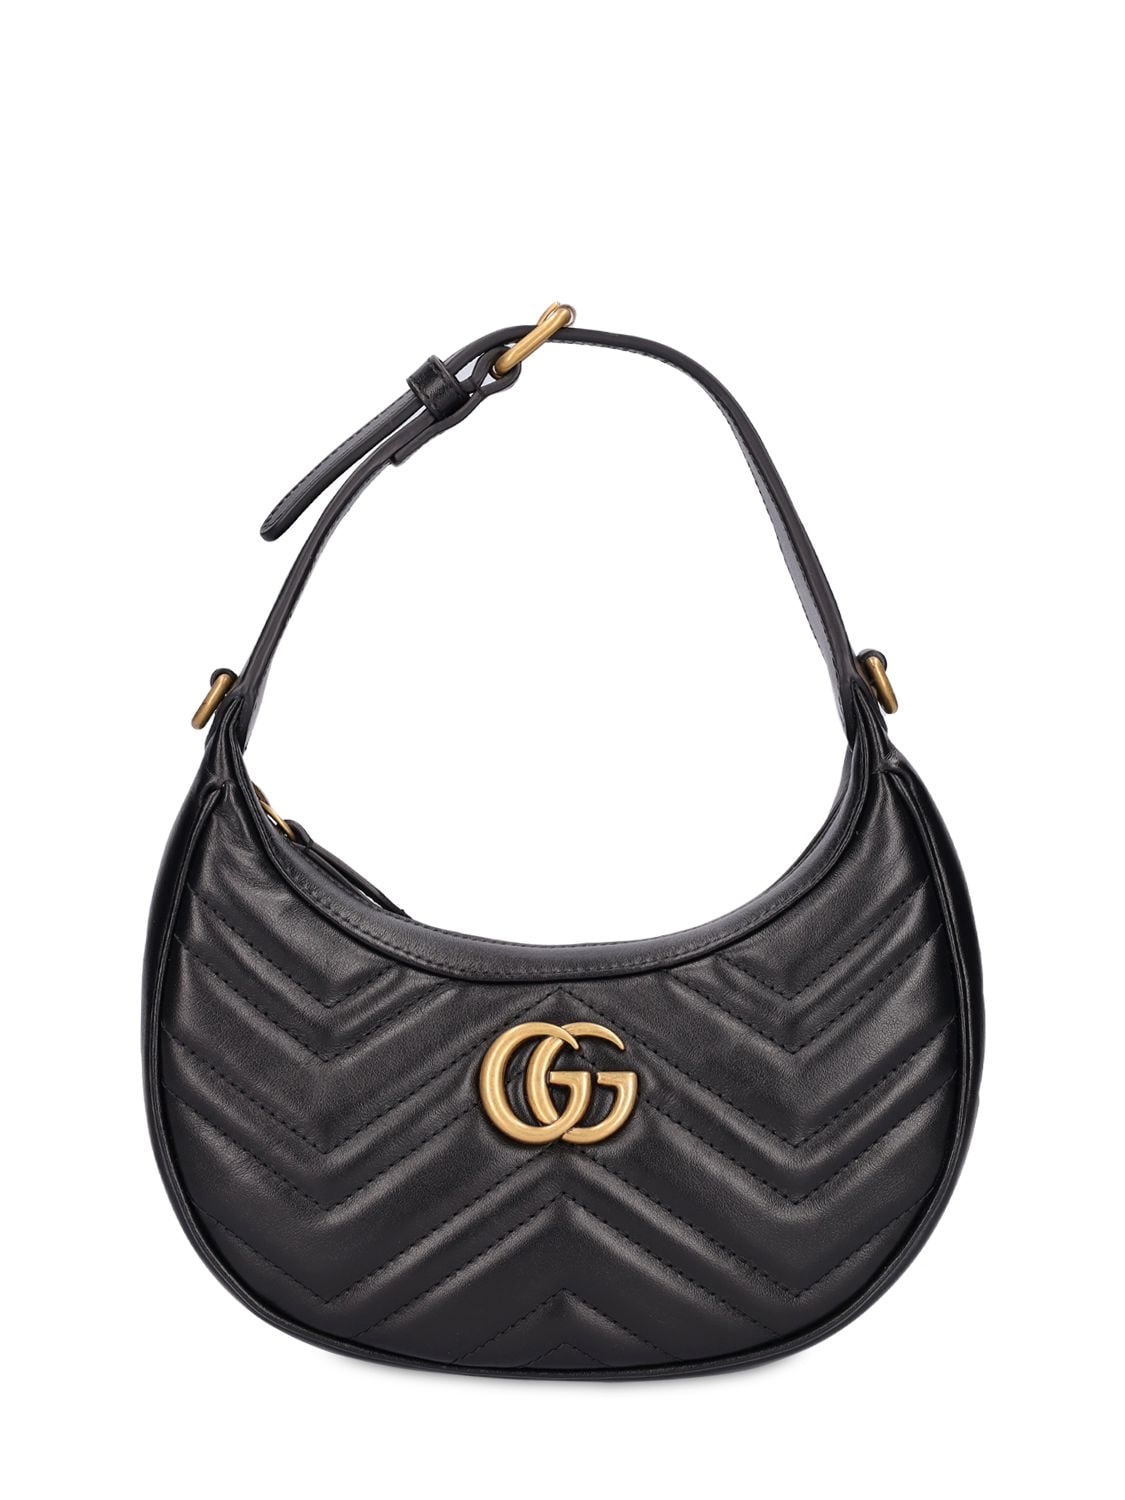 Image of Mini Gg Marmont Leather Bag